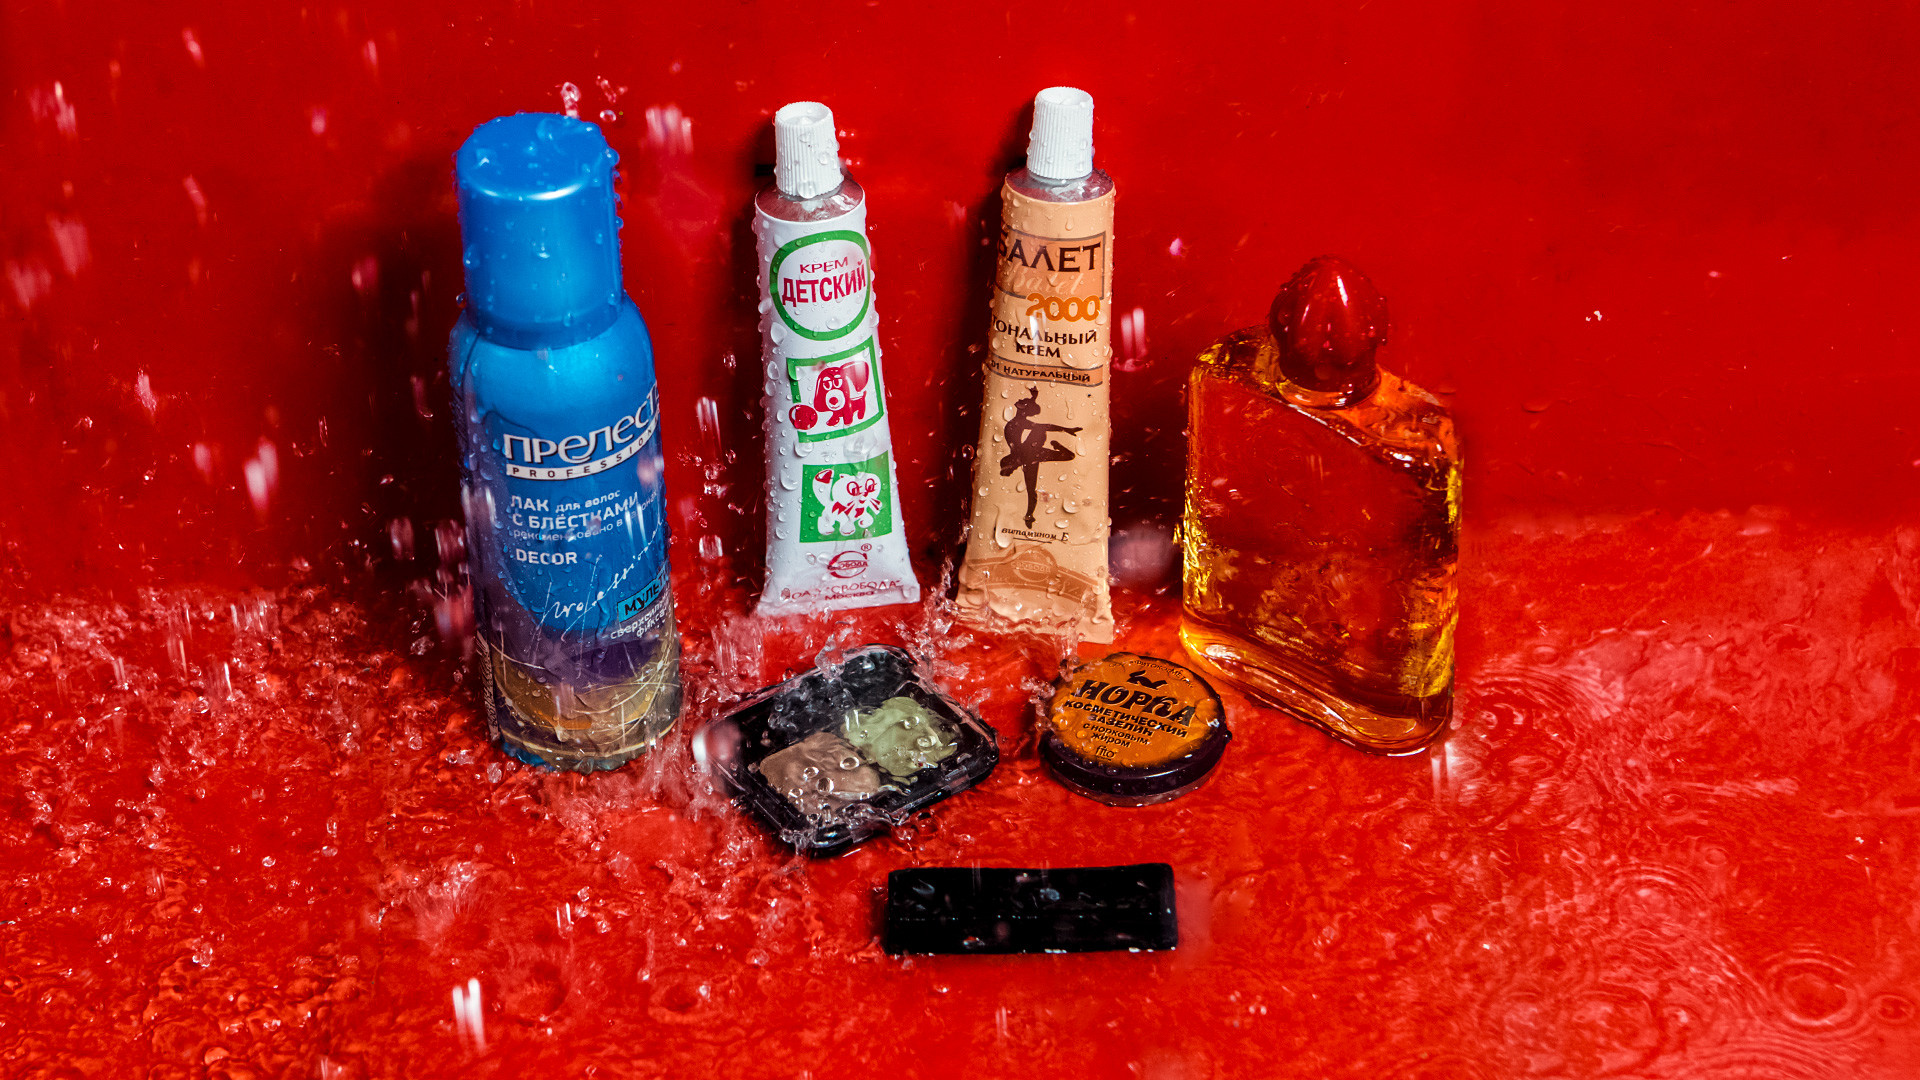 These cosmetic products helped are still popular in modern Russia.